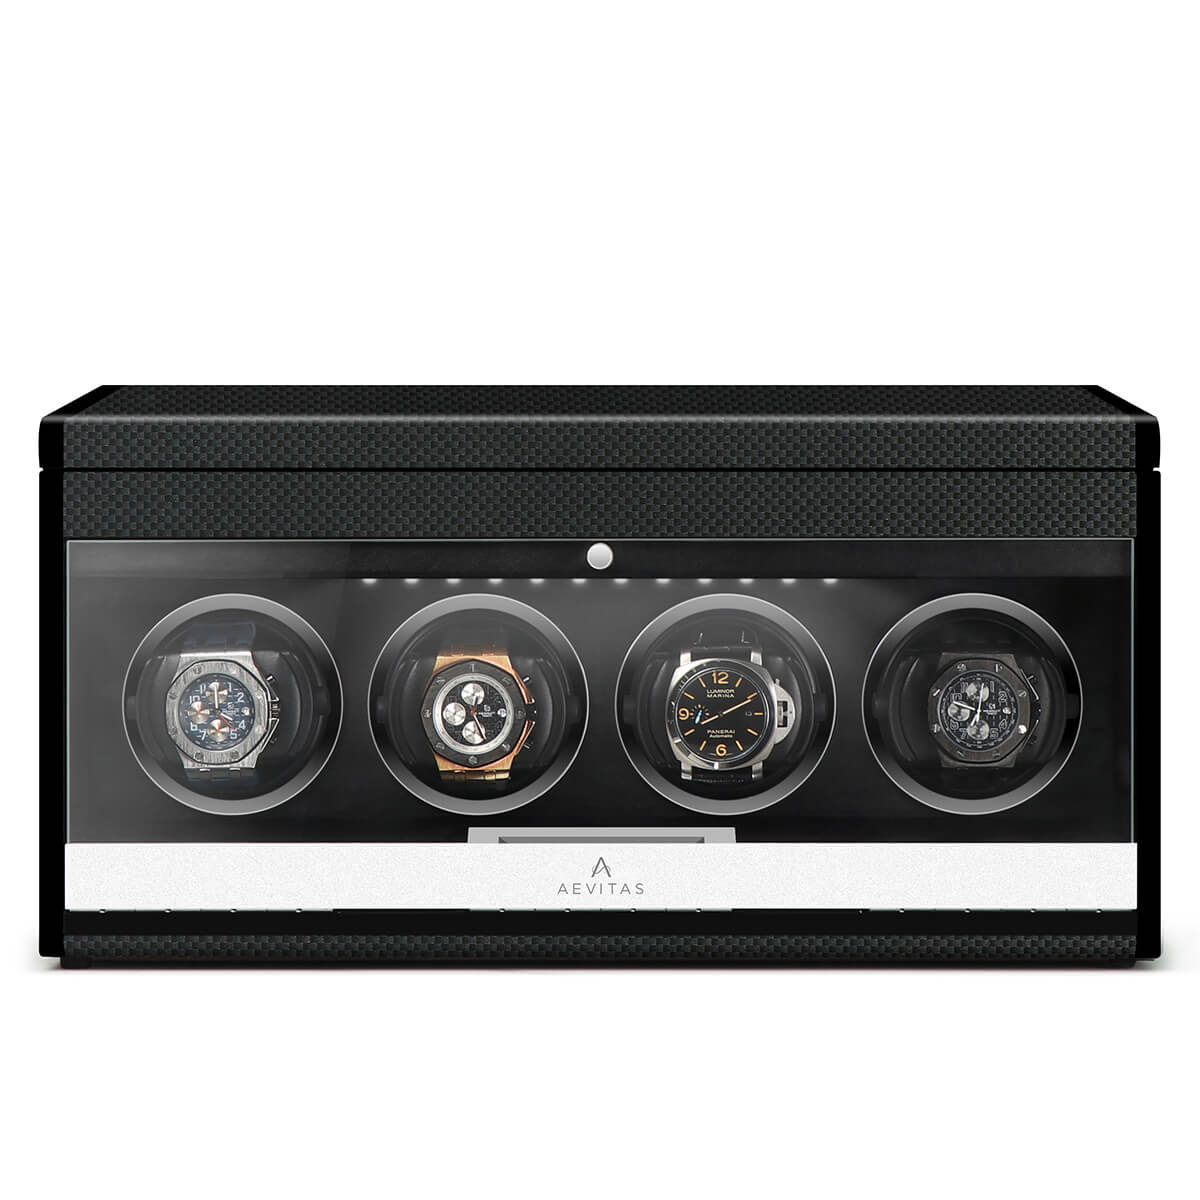 4 Watch Winder in Carbon Fibre with Extra Storage Area by Aevitas